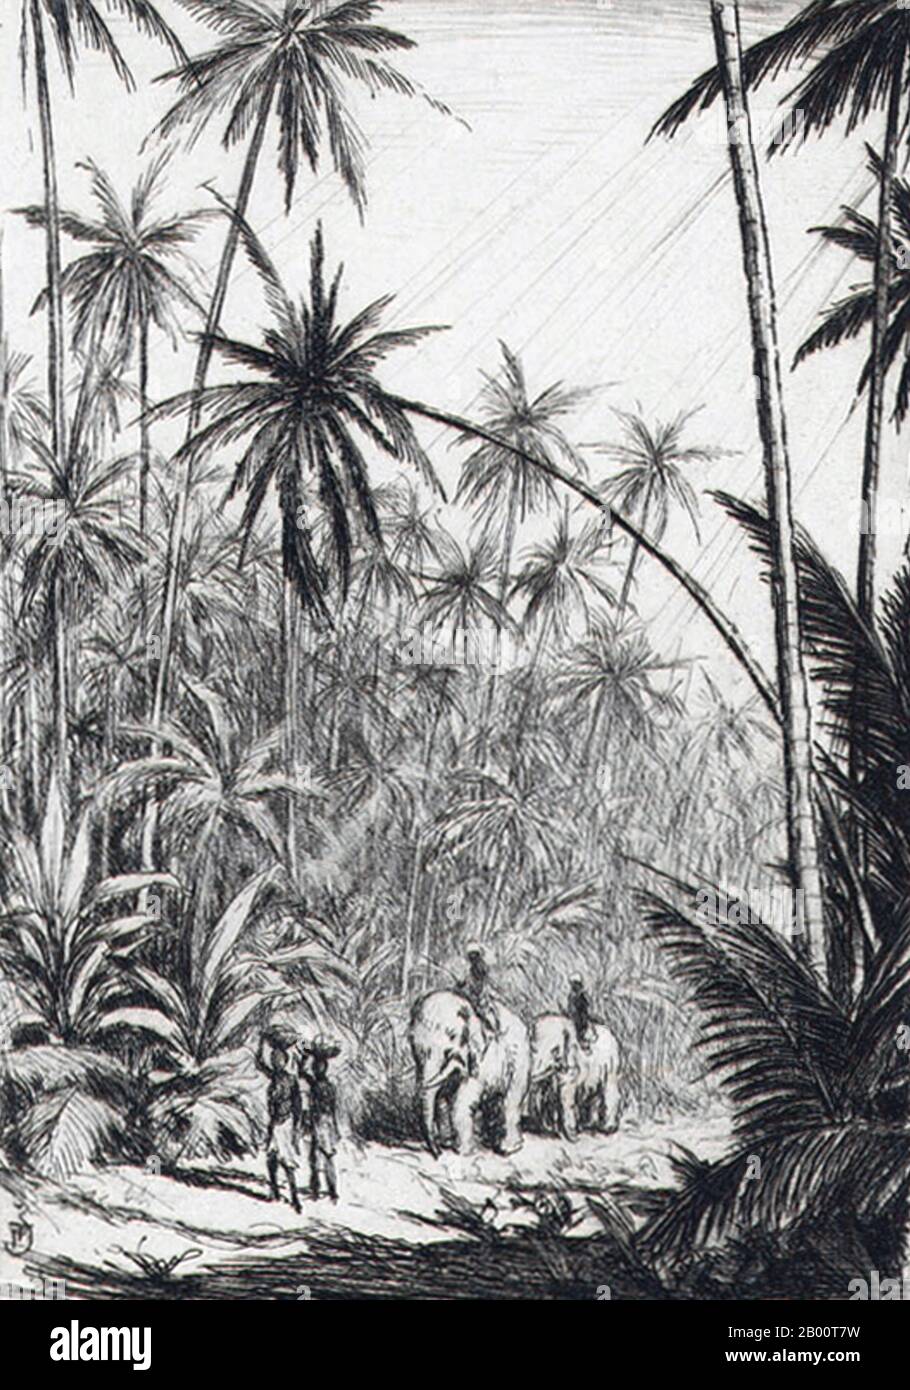 Sri Lanka/Czechoslovakia: 'Elephant Riders Passing through Coconut Plantations in the Rain'. Drawing by T. F. Simon (1877-1942), c. 1928.  Tavik Frantisek Simon (1877–1942), was a Czech painter, etcher, and woodcut artist. Although based mainly in Europe, his extensive travels took him to Morocco, Ceylon (now Sri Lanka), India, and Japan, images of all of which appear in his  artistic work. He died in Prague in 1942. Largely ignored during the Communist era in Czechoslovakia, his work has received greater attention in recent years. Stock Photo